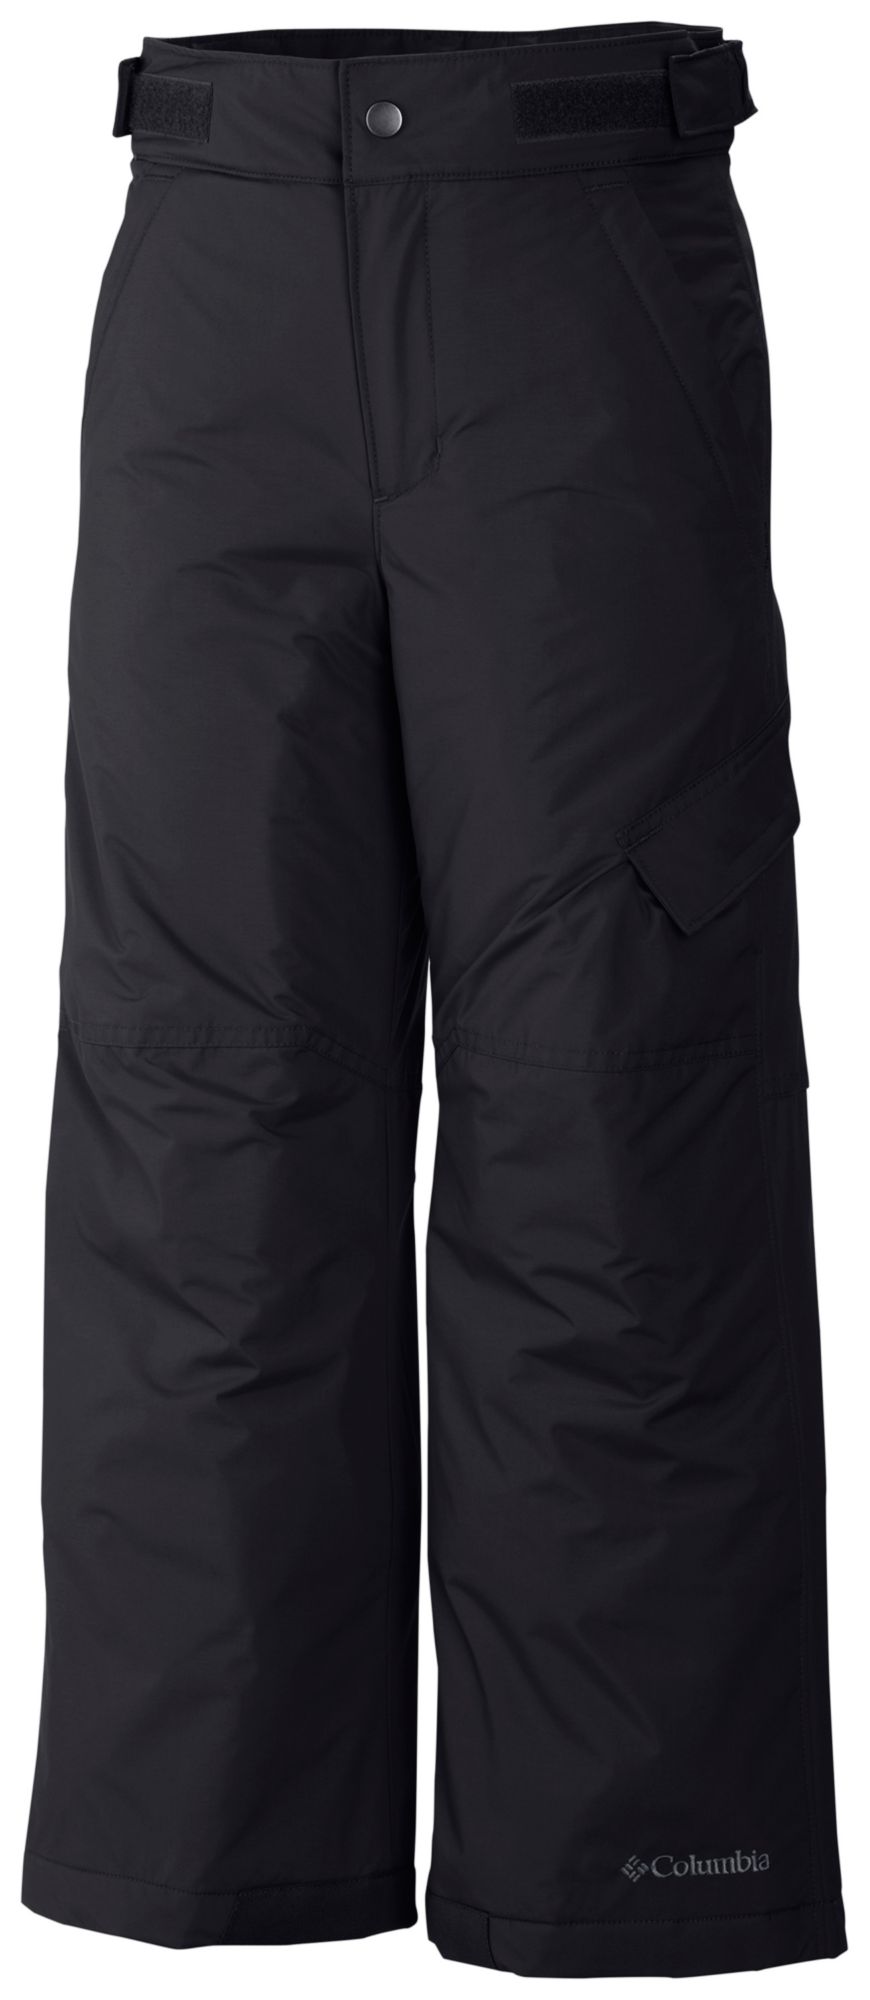 Photos - Ski Wear Columbia Youth Ice Slope II Insulated Pants, Boys', XL, Black 16CMBYCSLPPN 